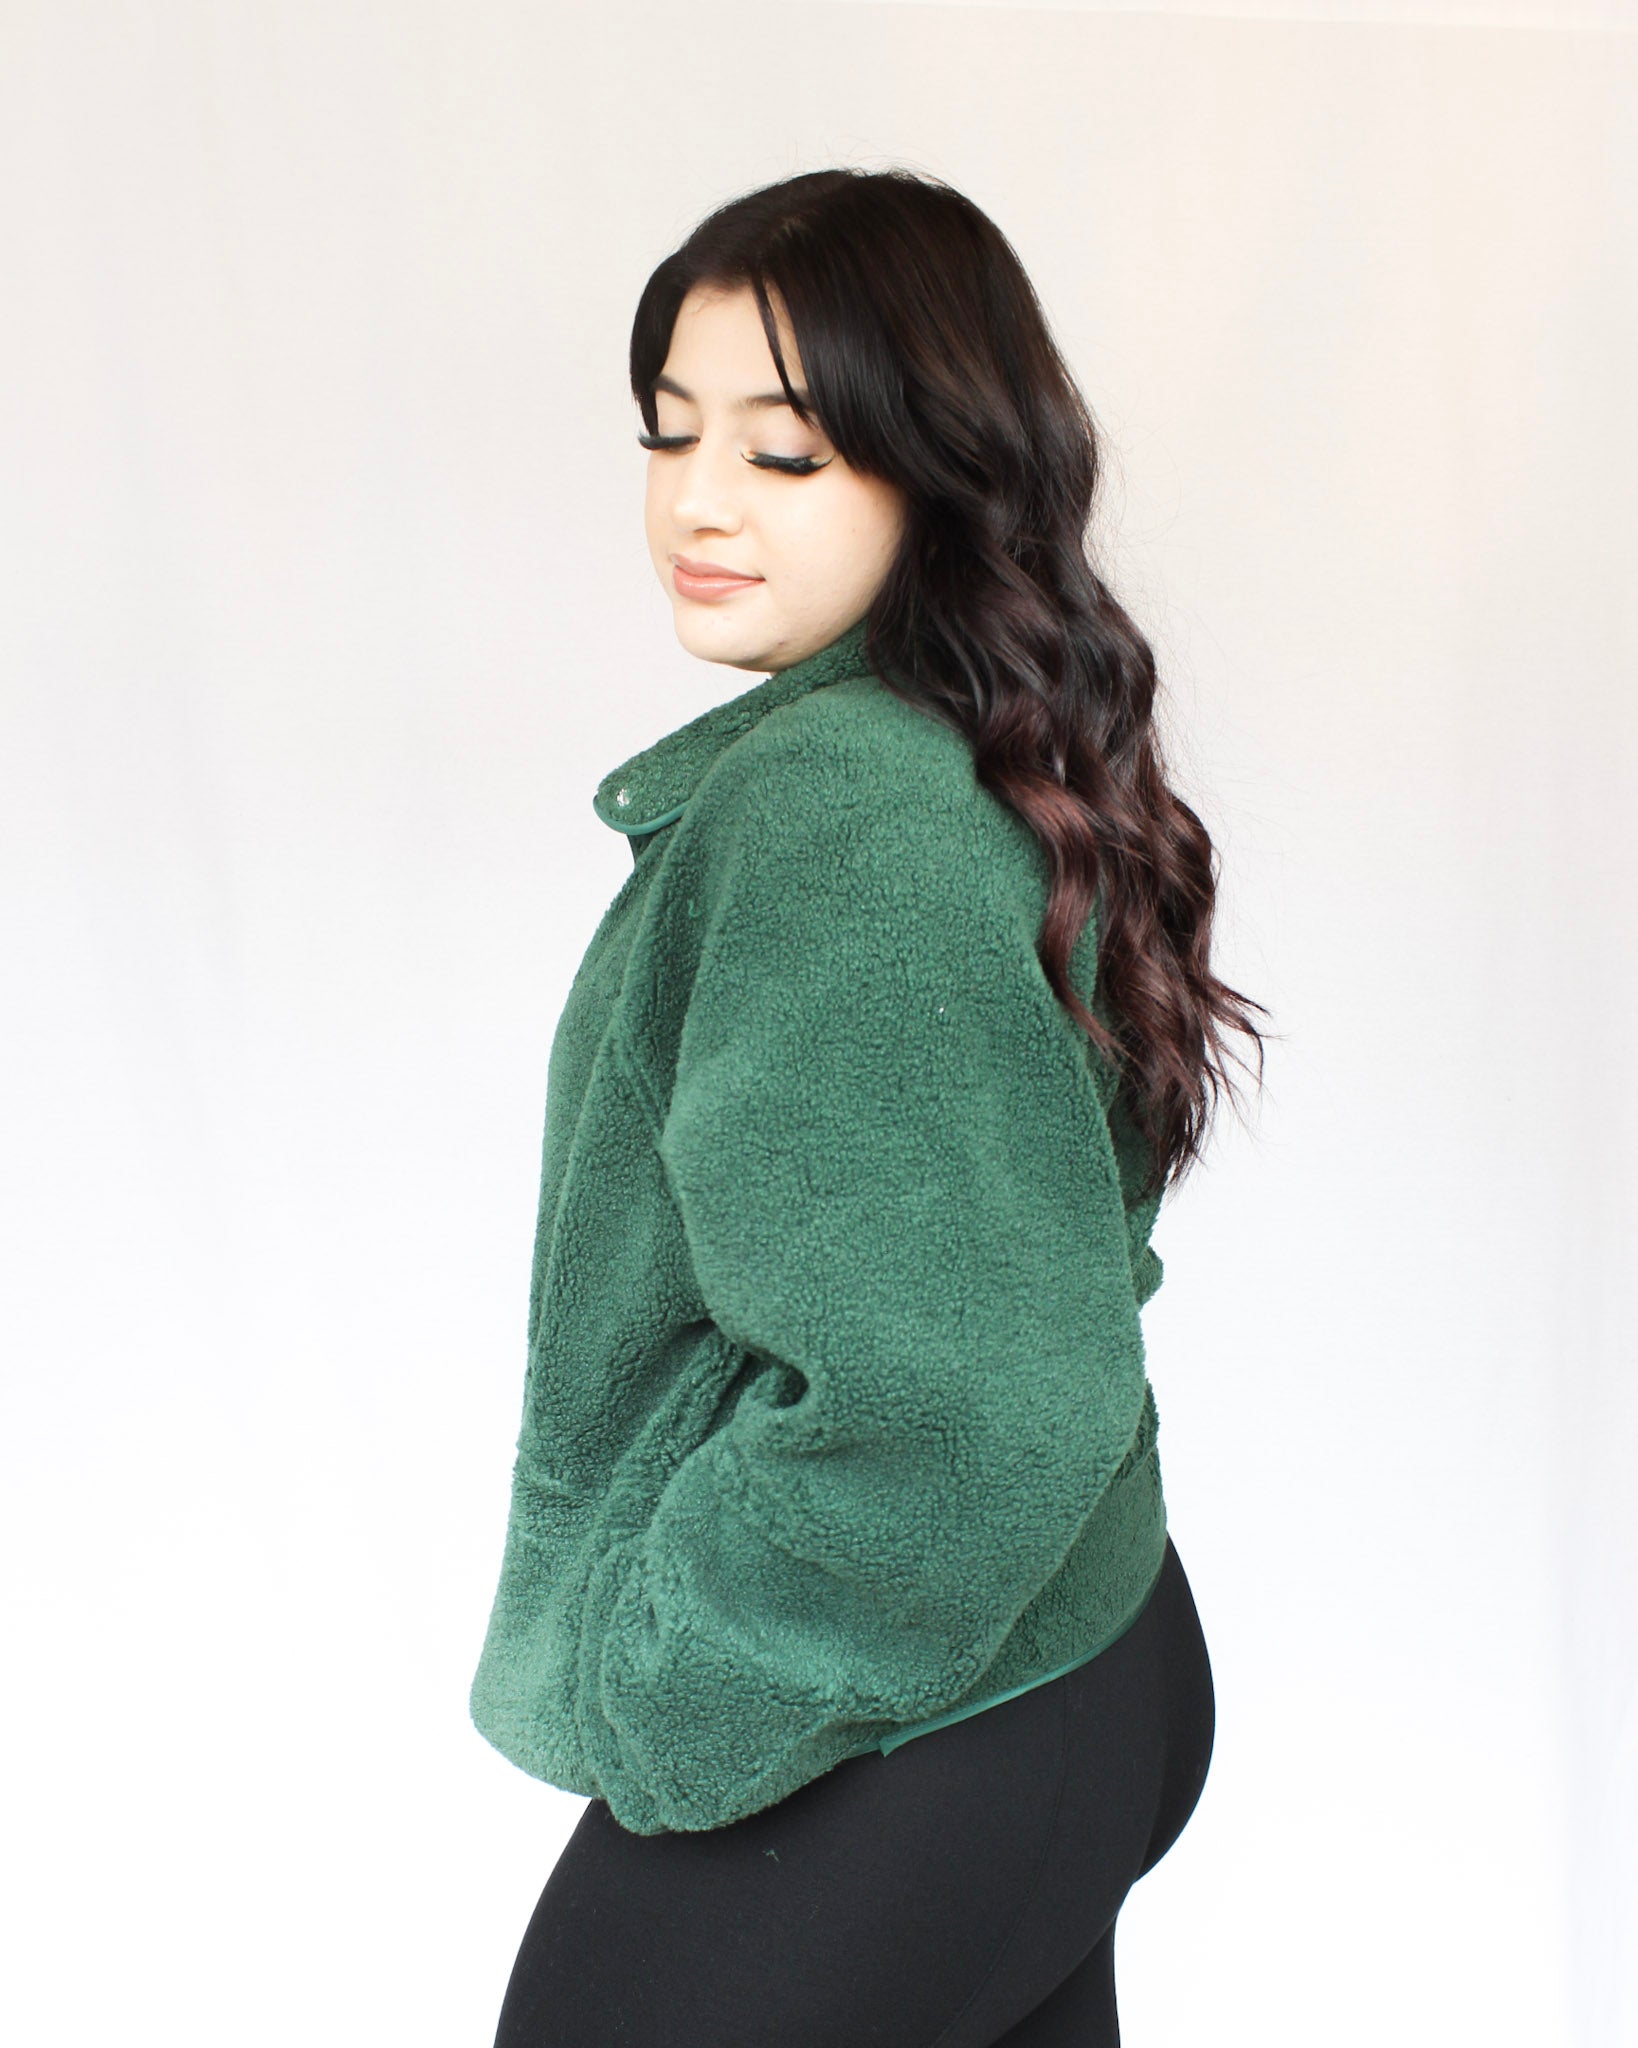 Fuzzy soft forest green button up jacket with two pockets and roll down collar